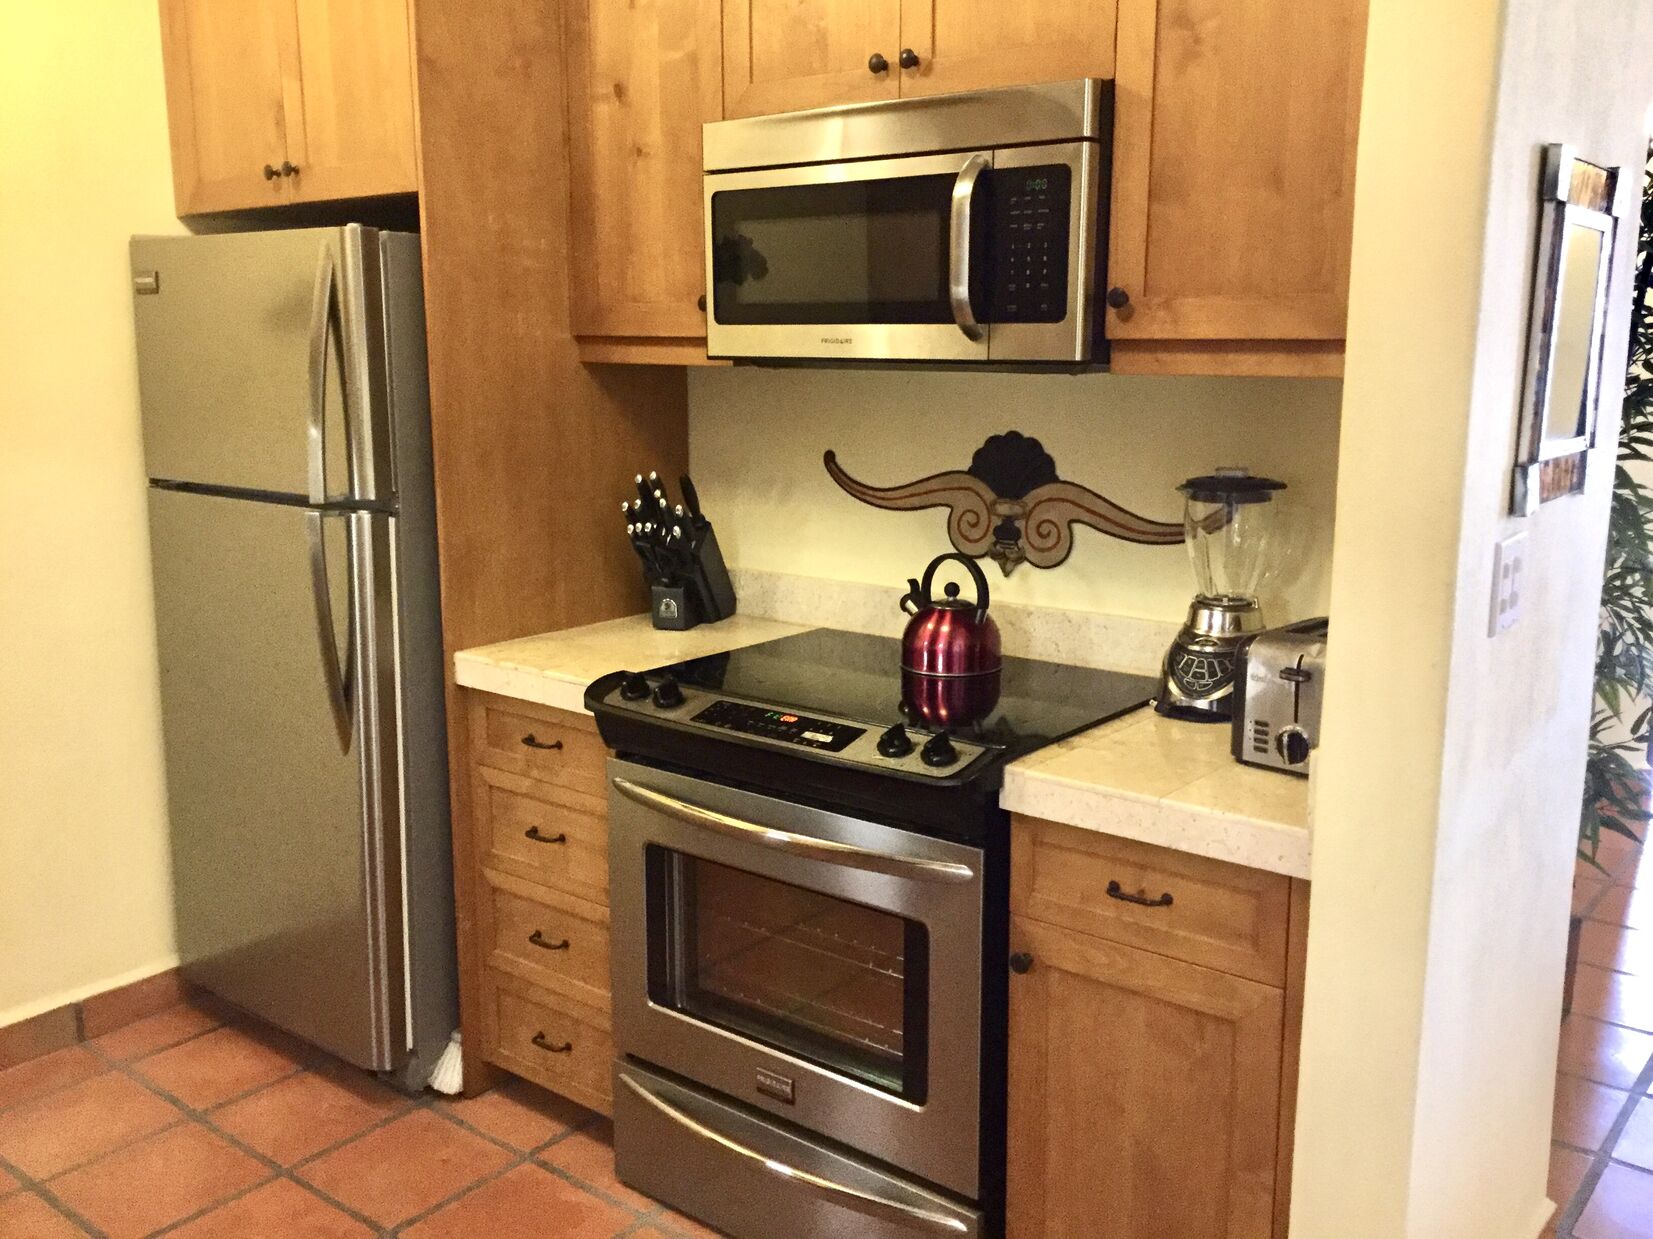 Kitchen, fully equipped, dishwasher, coffee maker, stove, Refrigerator, Microwave